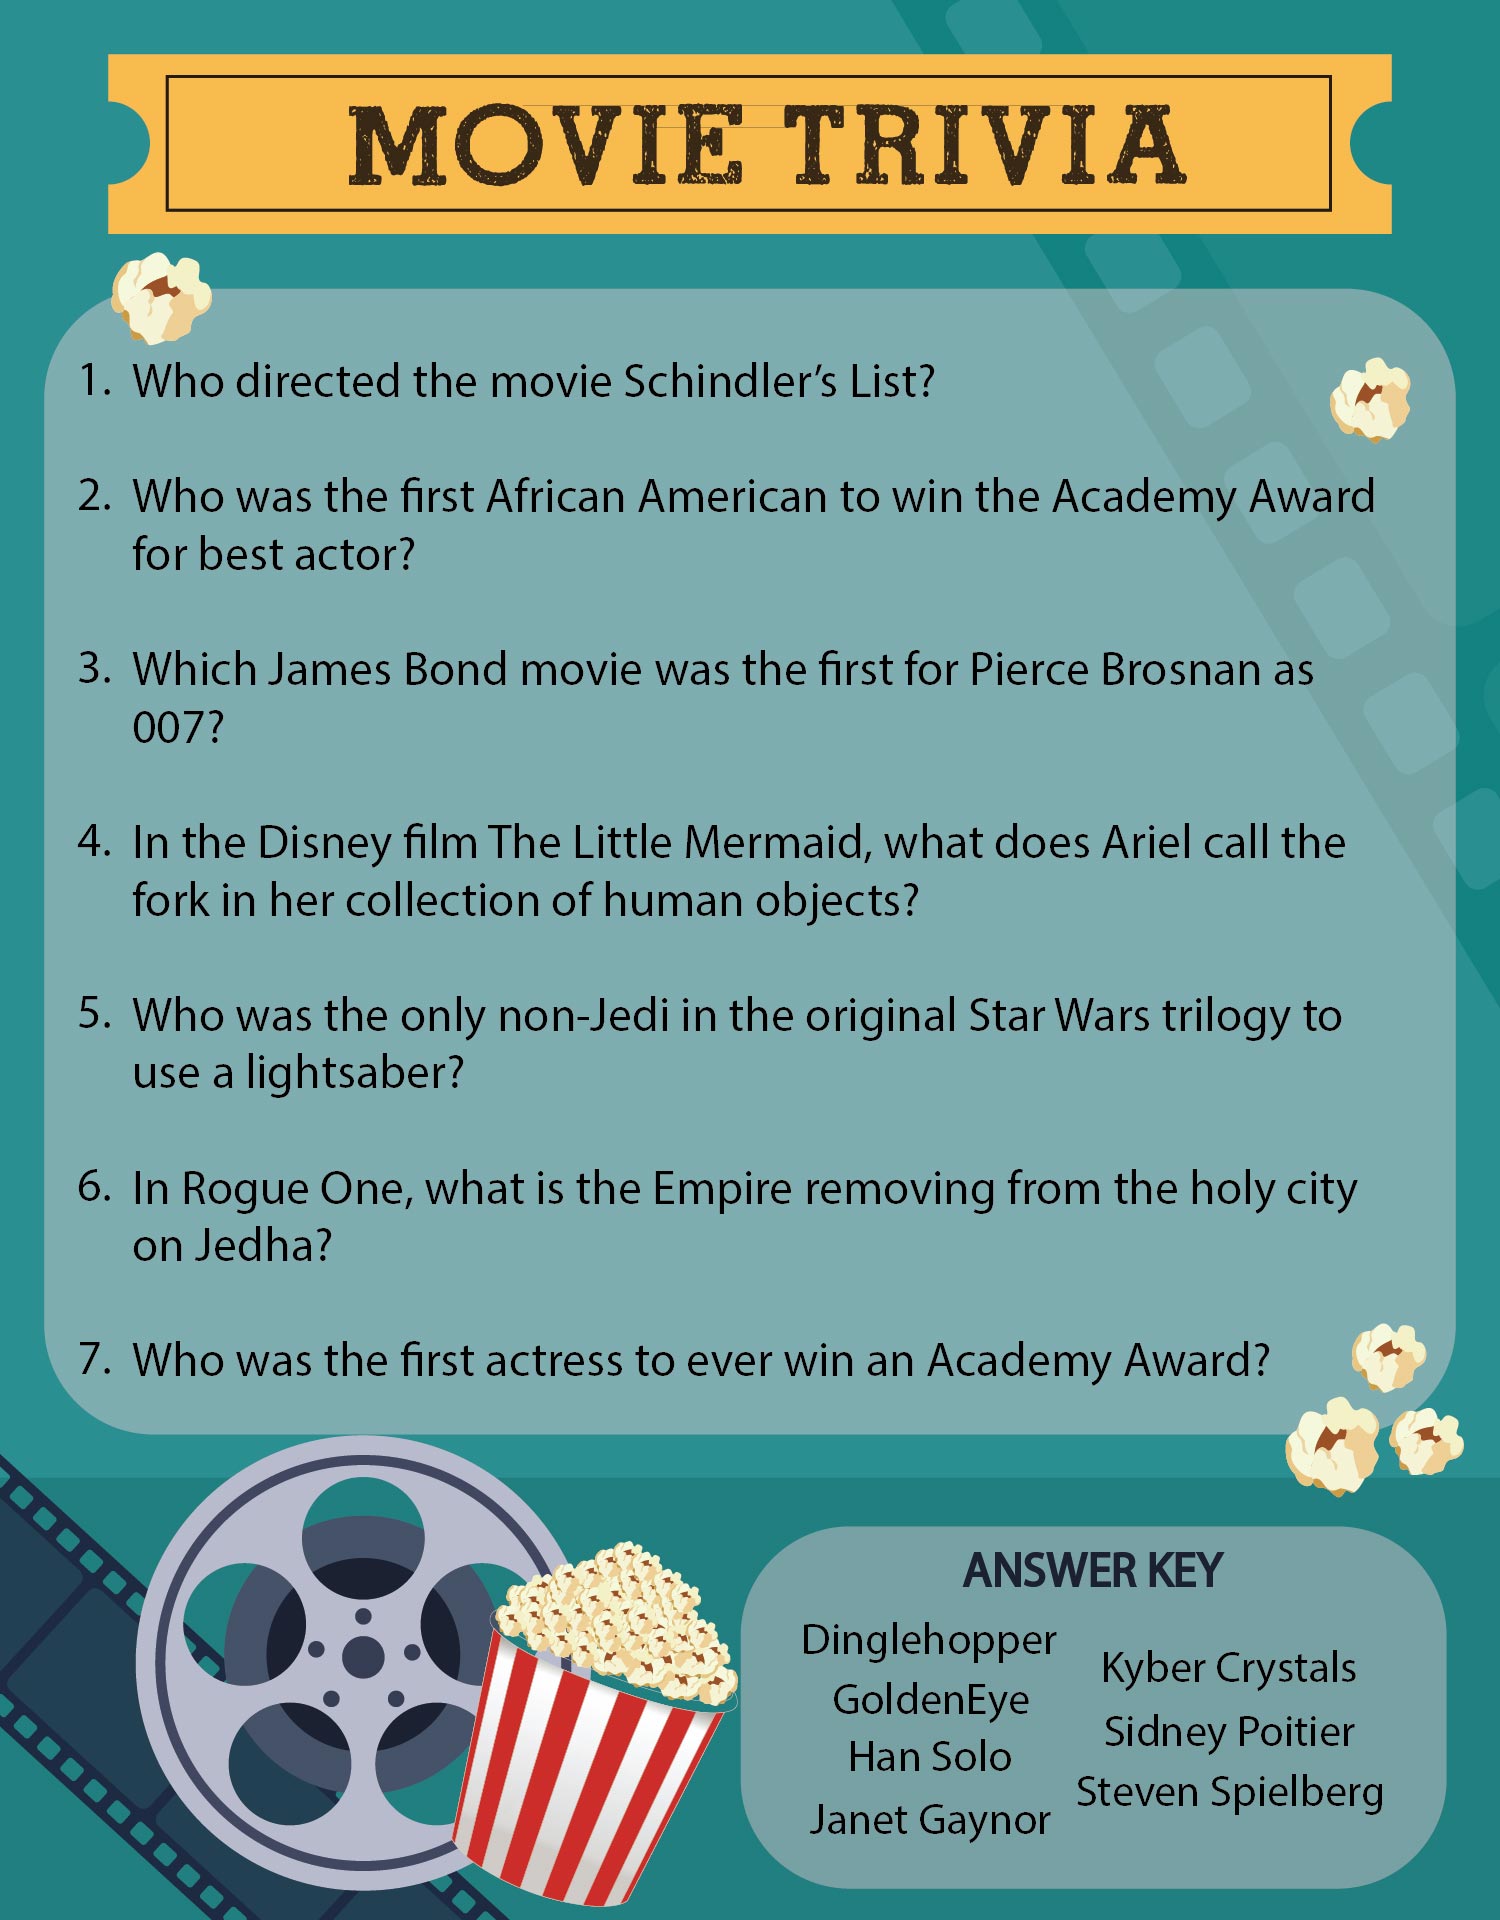 movie quote trivia and answers